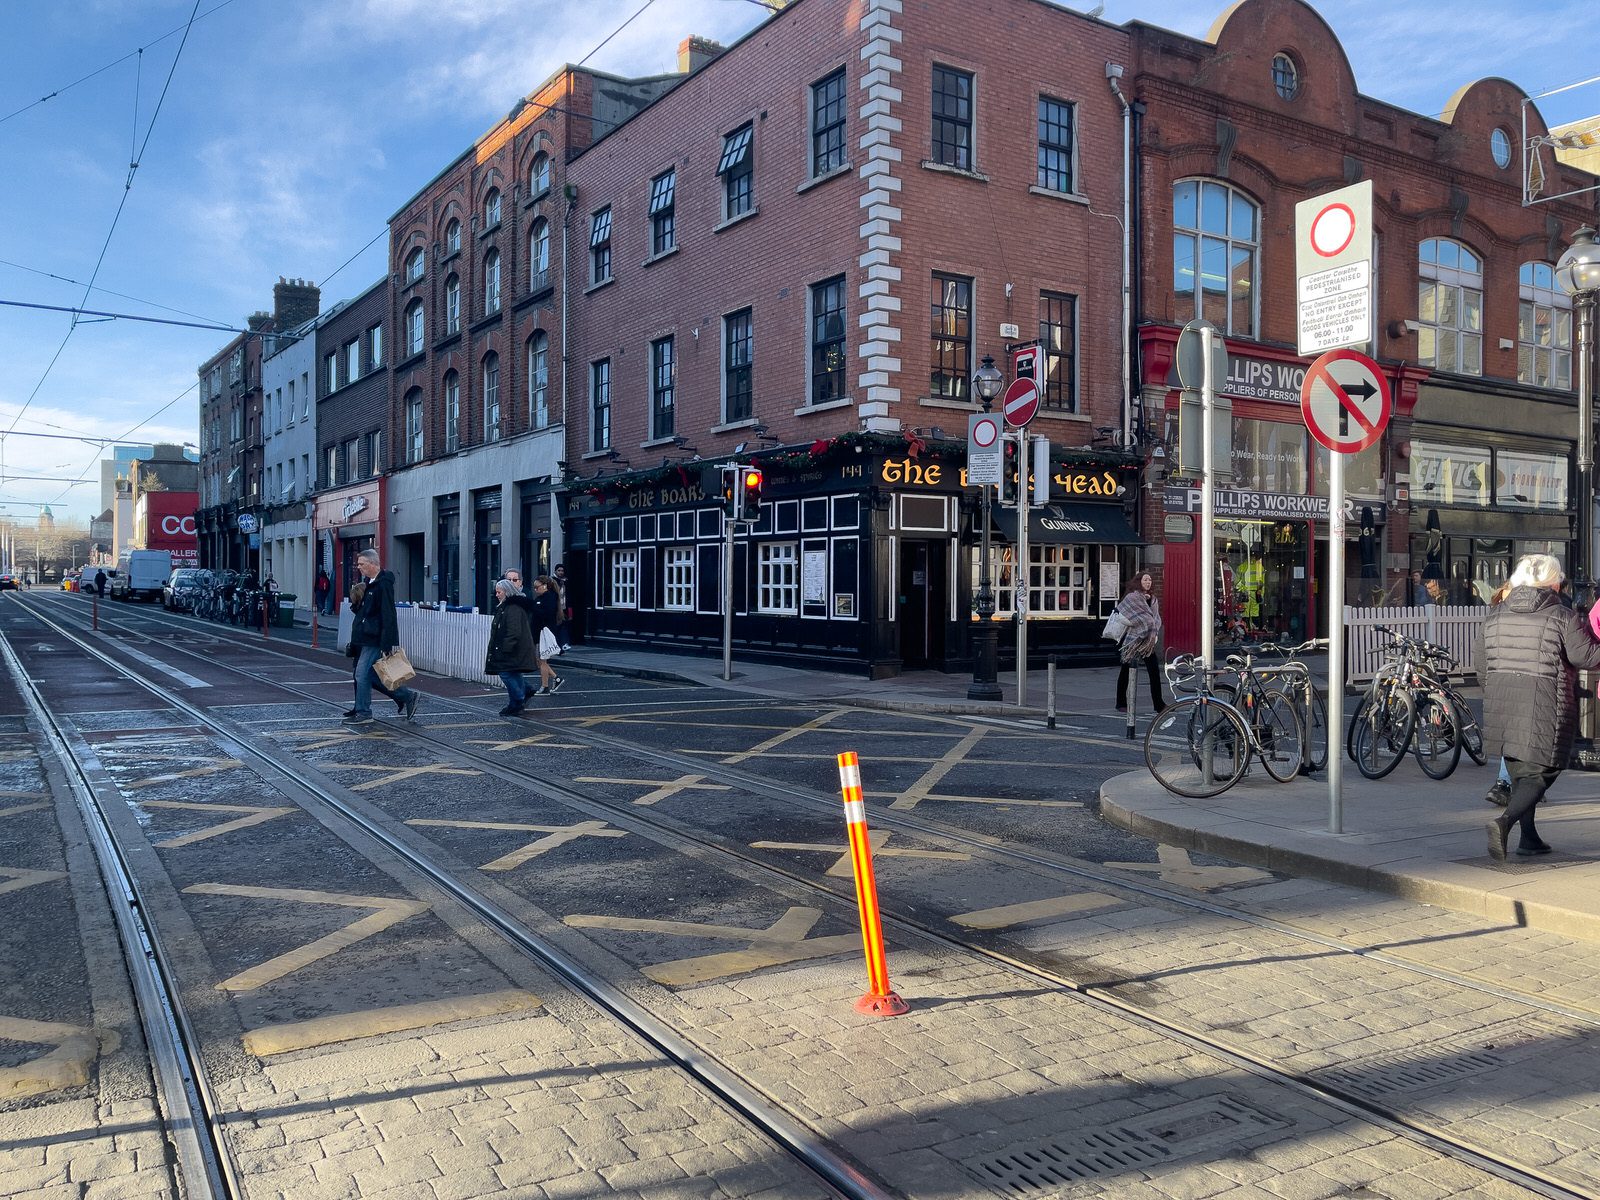 THE NEW STREET FURNITURE AND THE CHRISTMAS TREE [HAVE ARRIVED IN CAPEL STREET]-225871-1